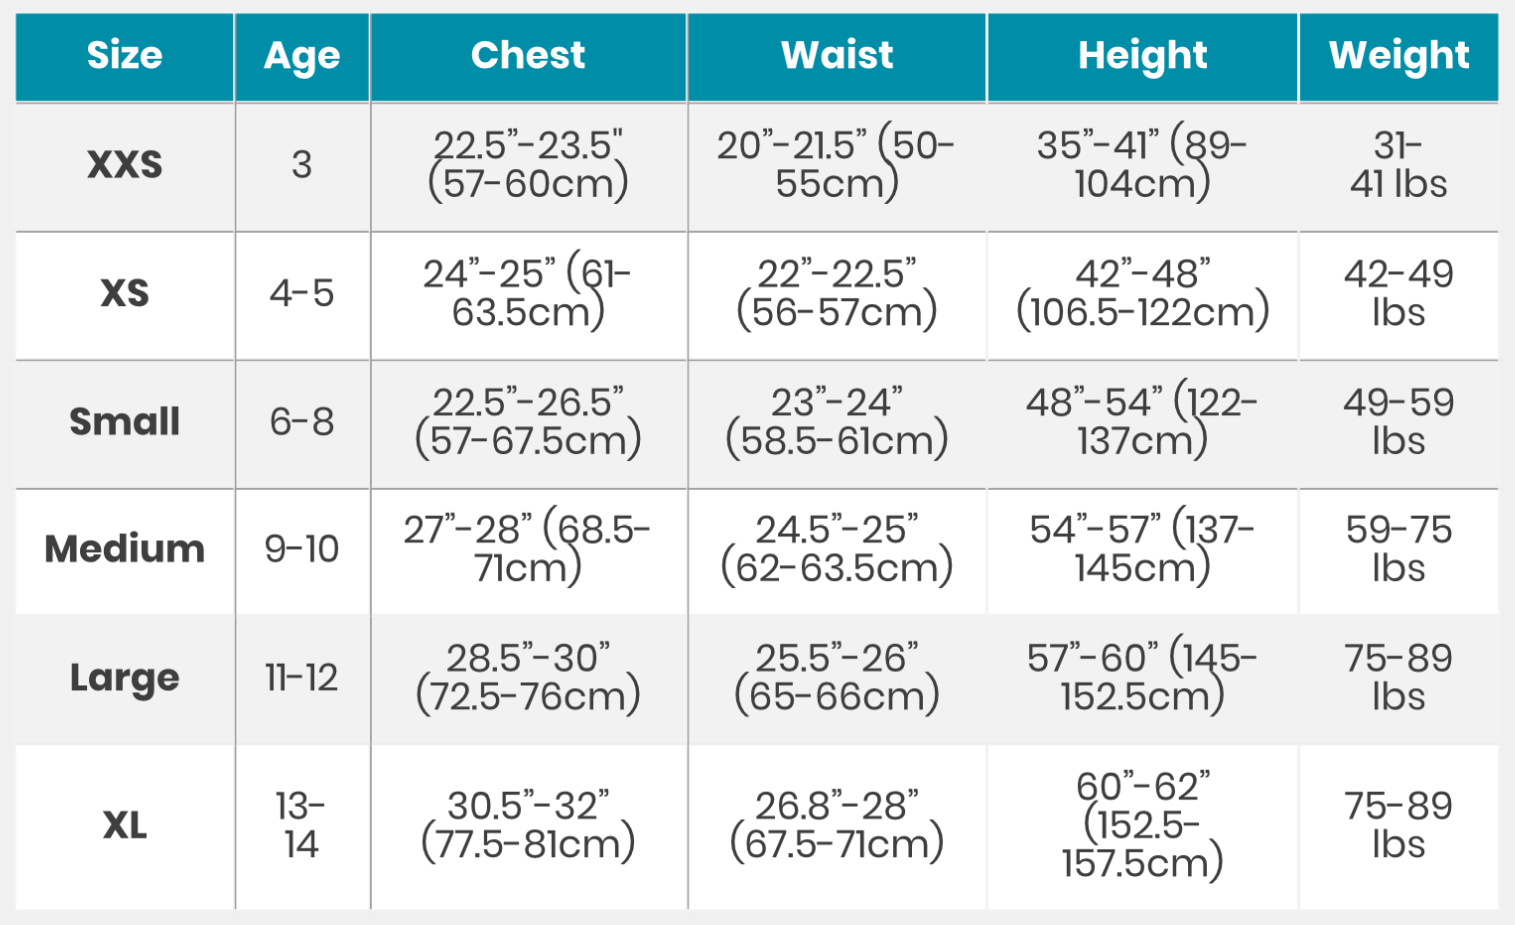 Smartwool Kids sizing runs similar to other brands